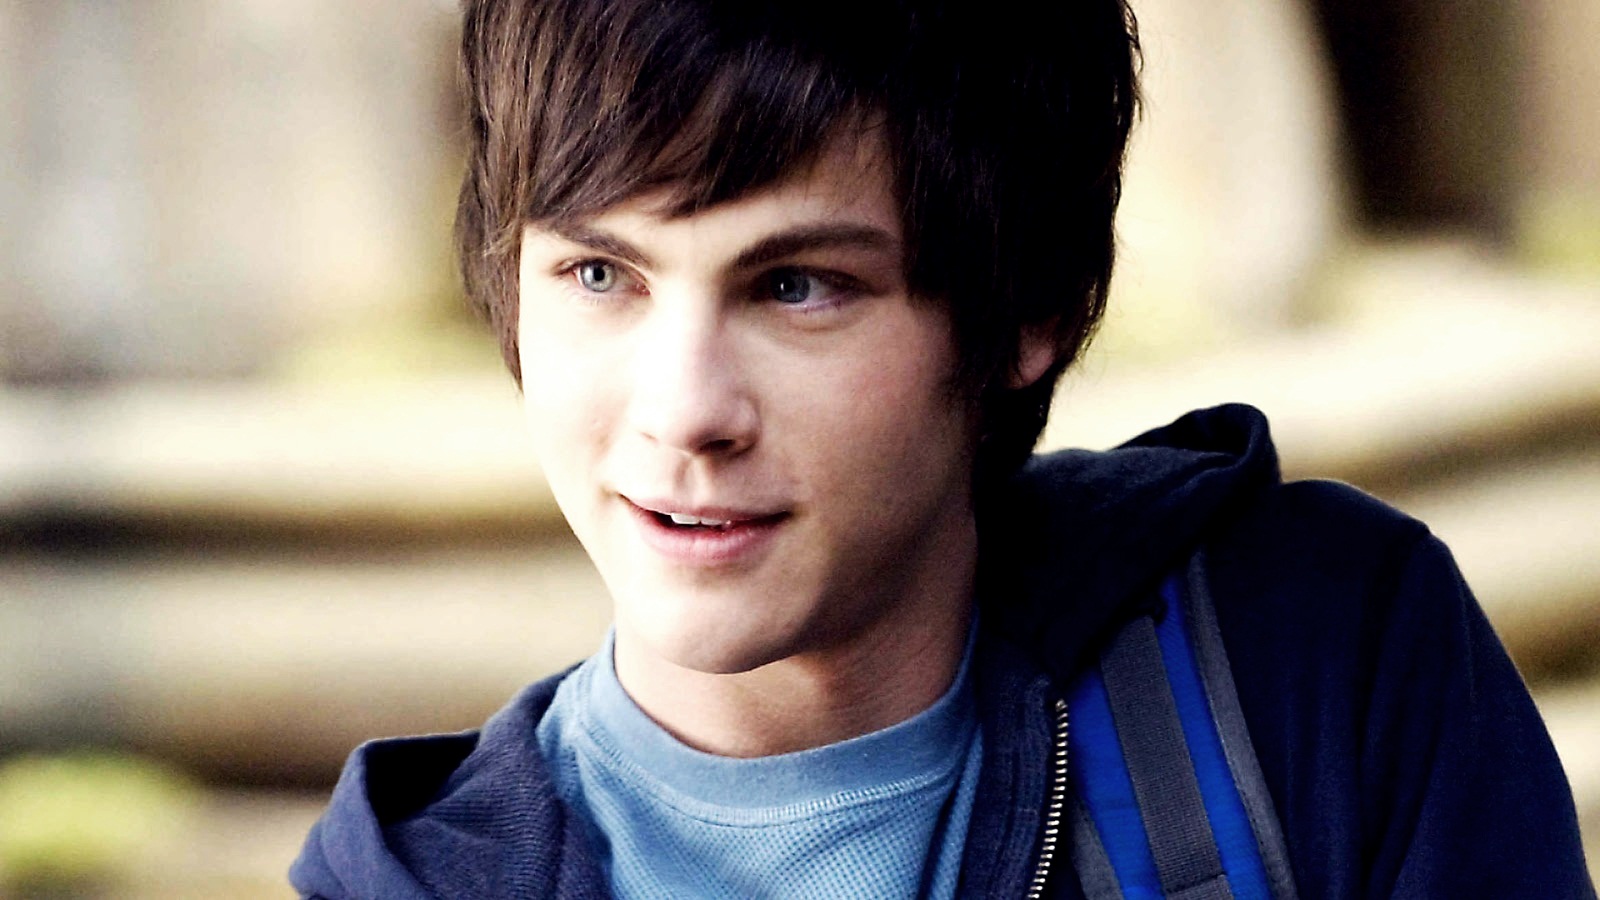 How old was Logan Lerman when he played Percy Jackson?